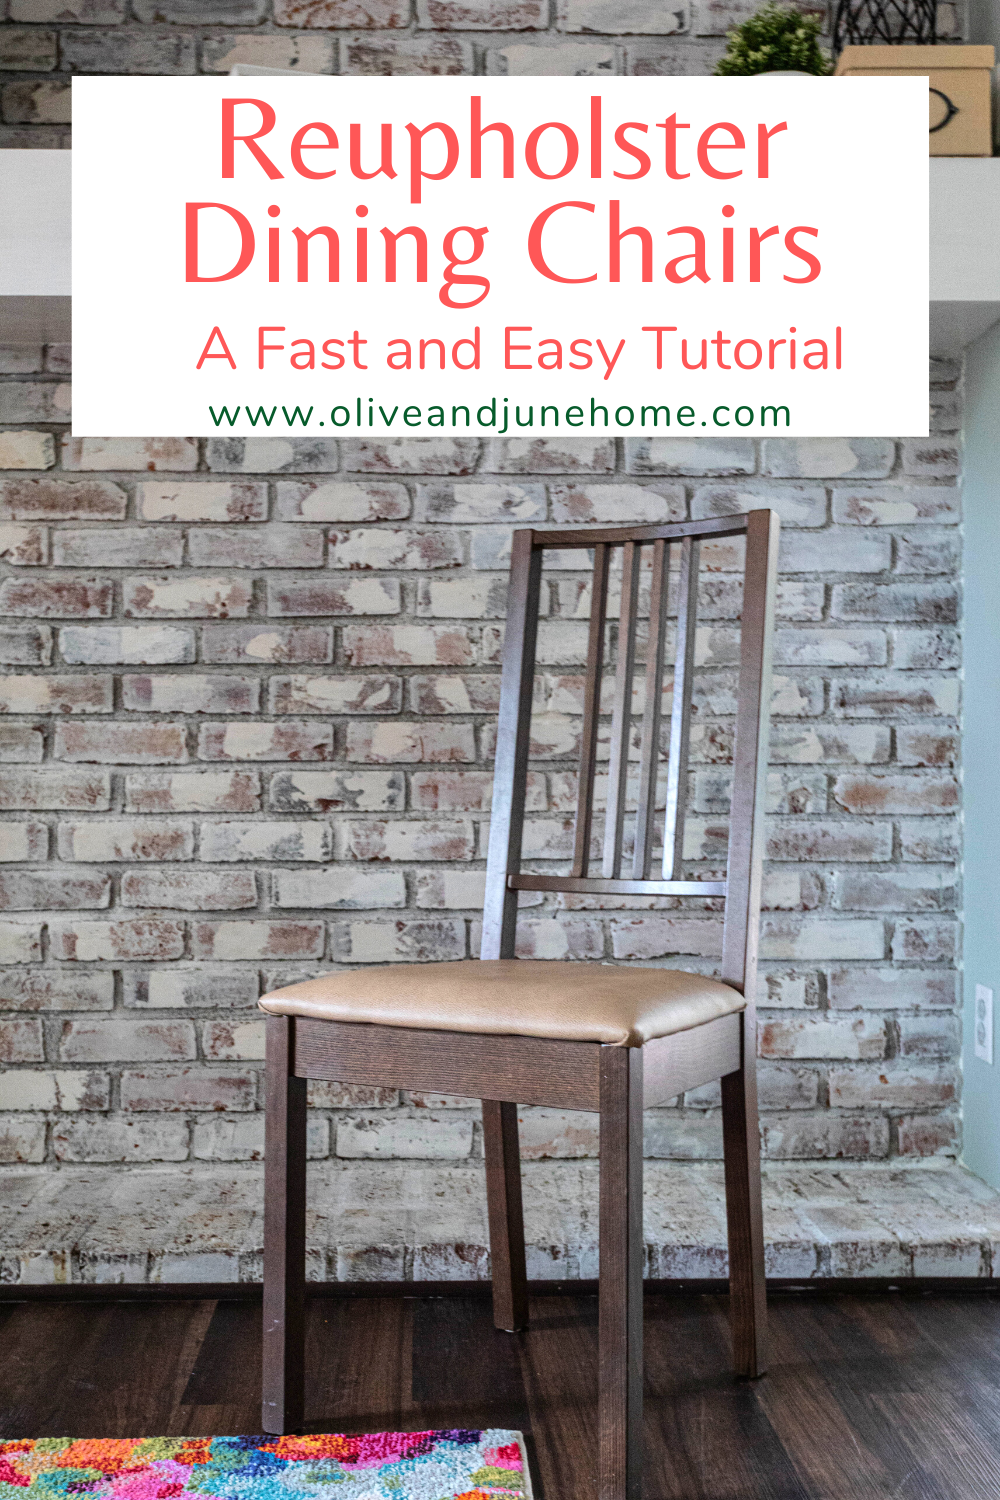 How to Reupholster Dining Chairs - DIY Tutorial 